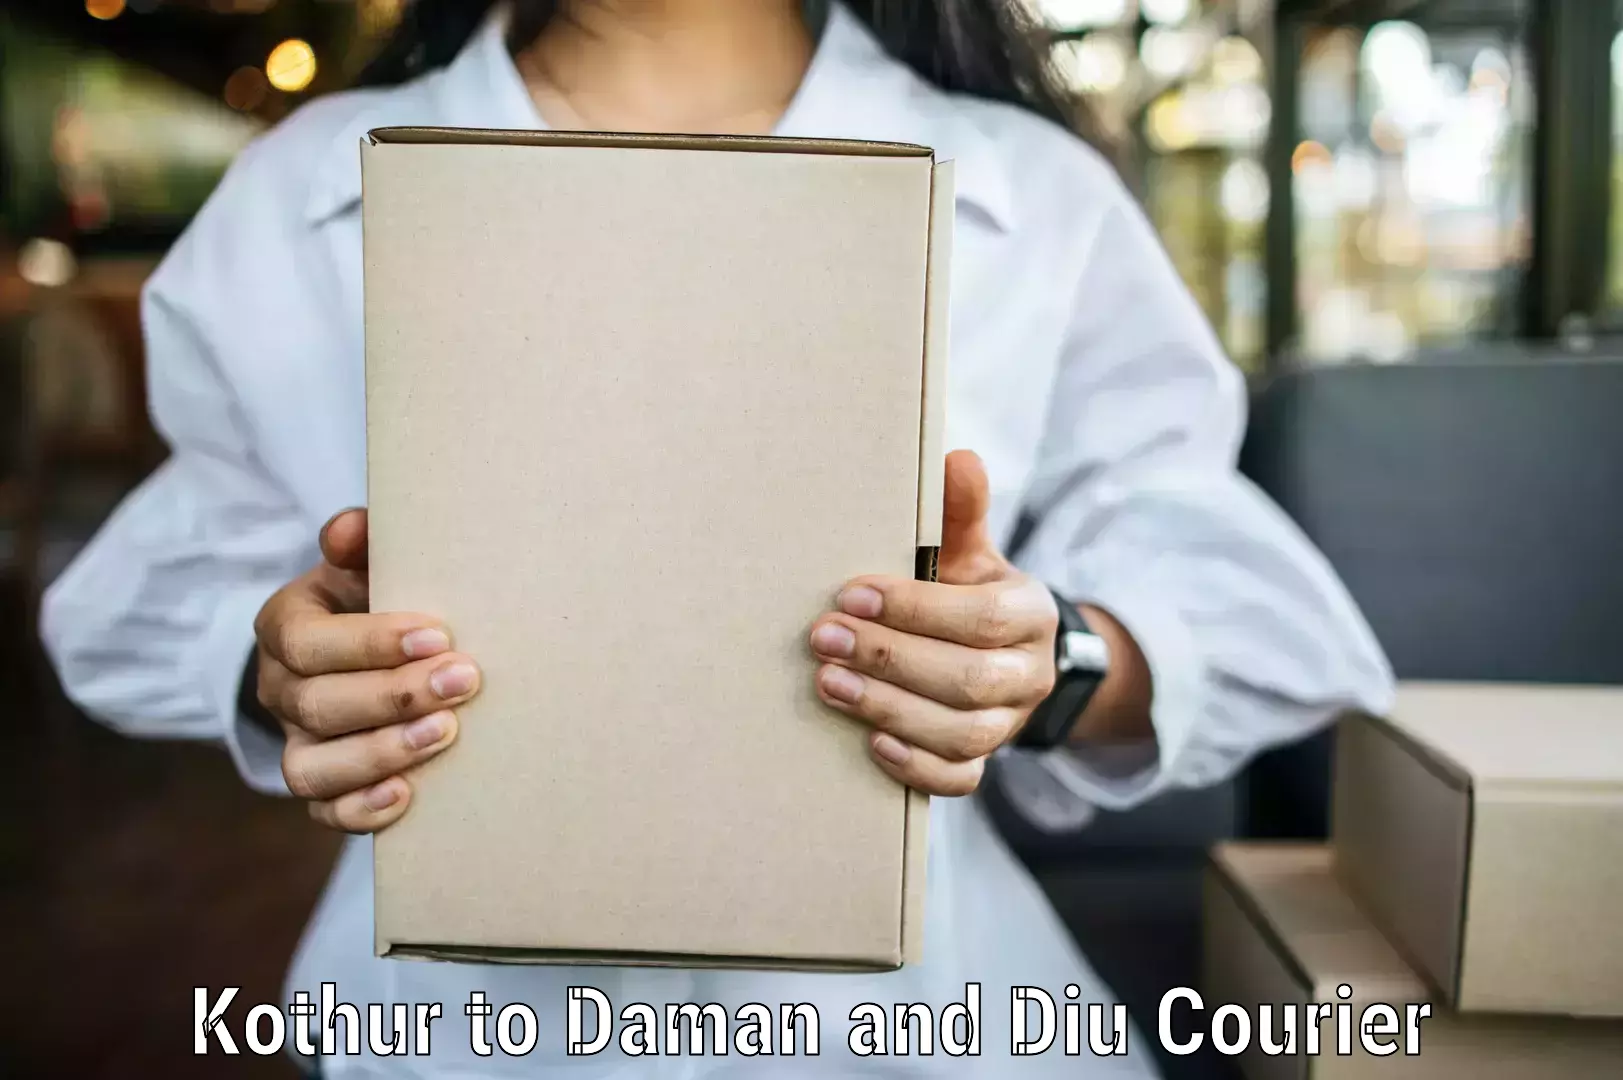 Subscription-based courier Kothur to Daman and Diu